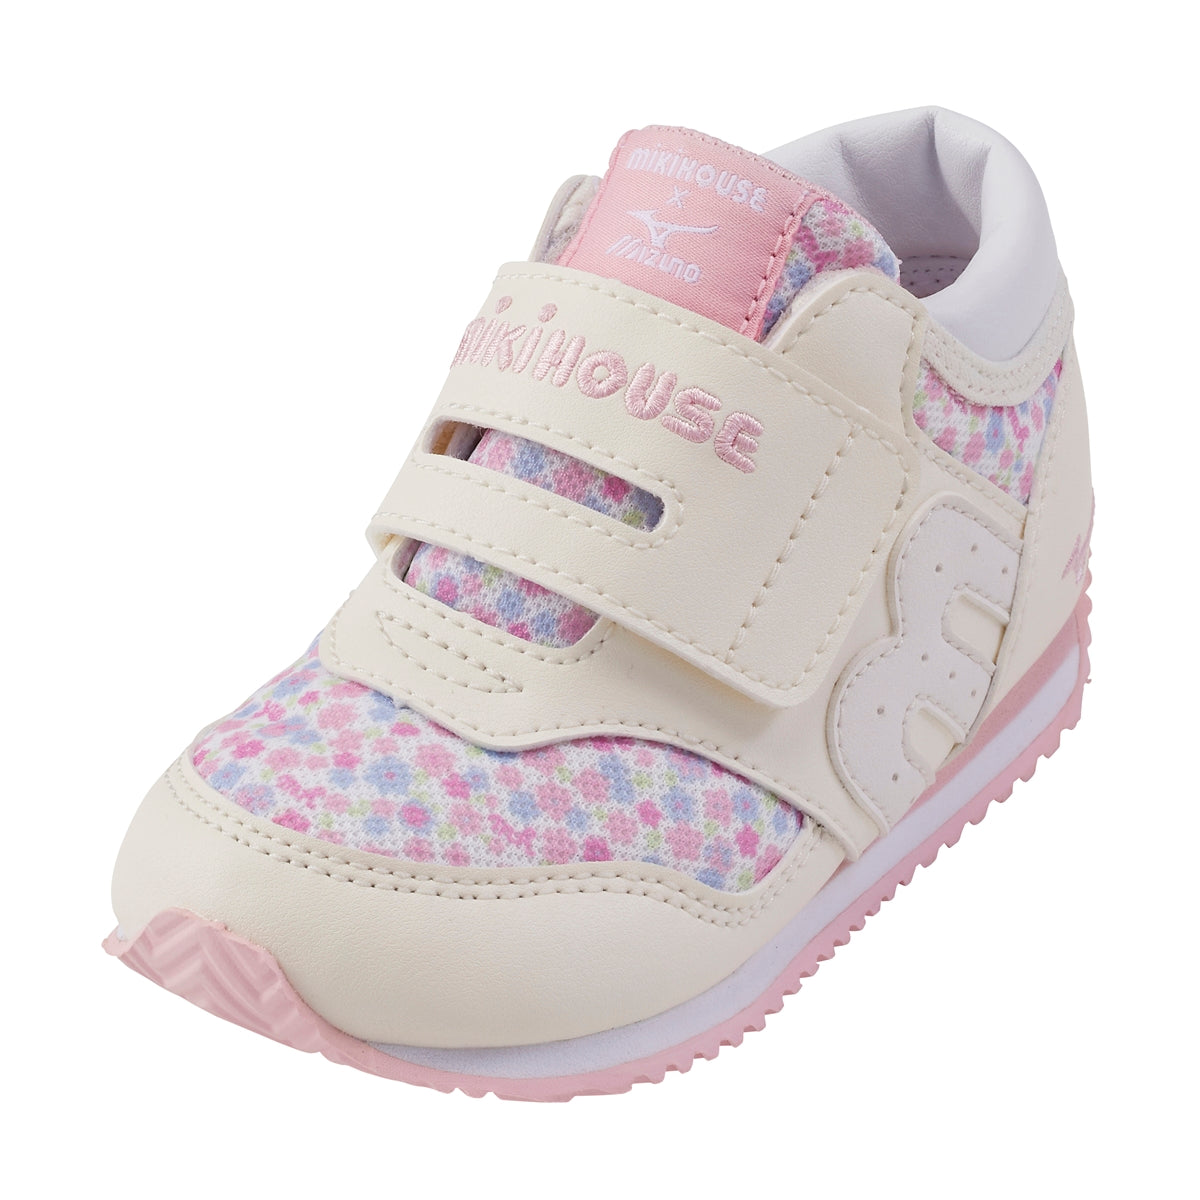 MIKI HOUSE & Mizuno Second Shoes - Floral